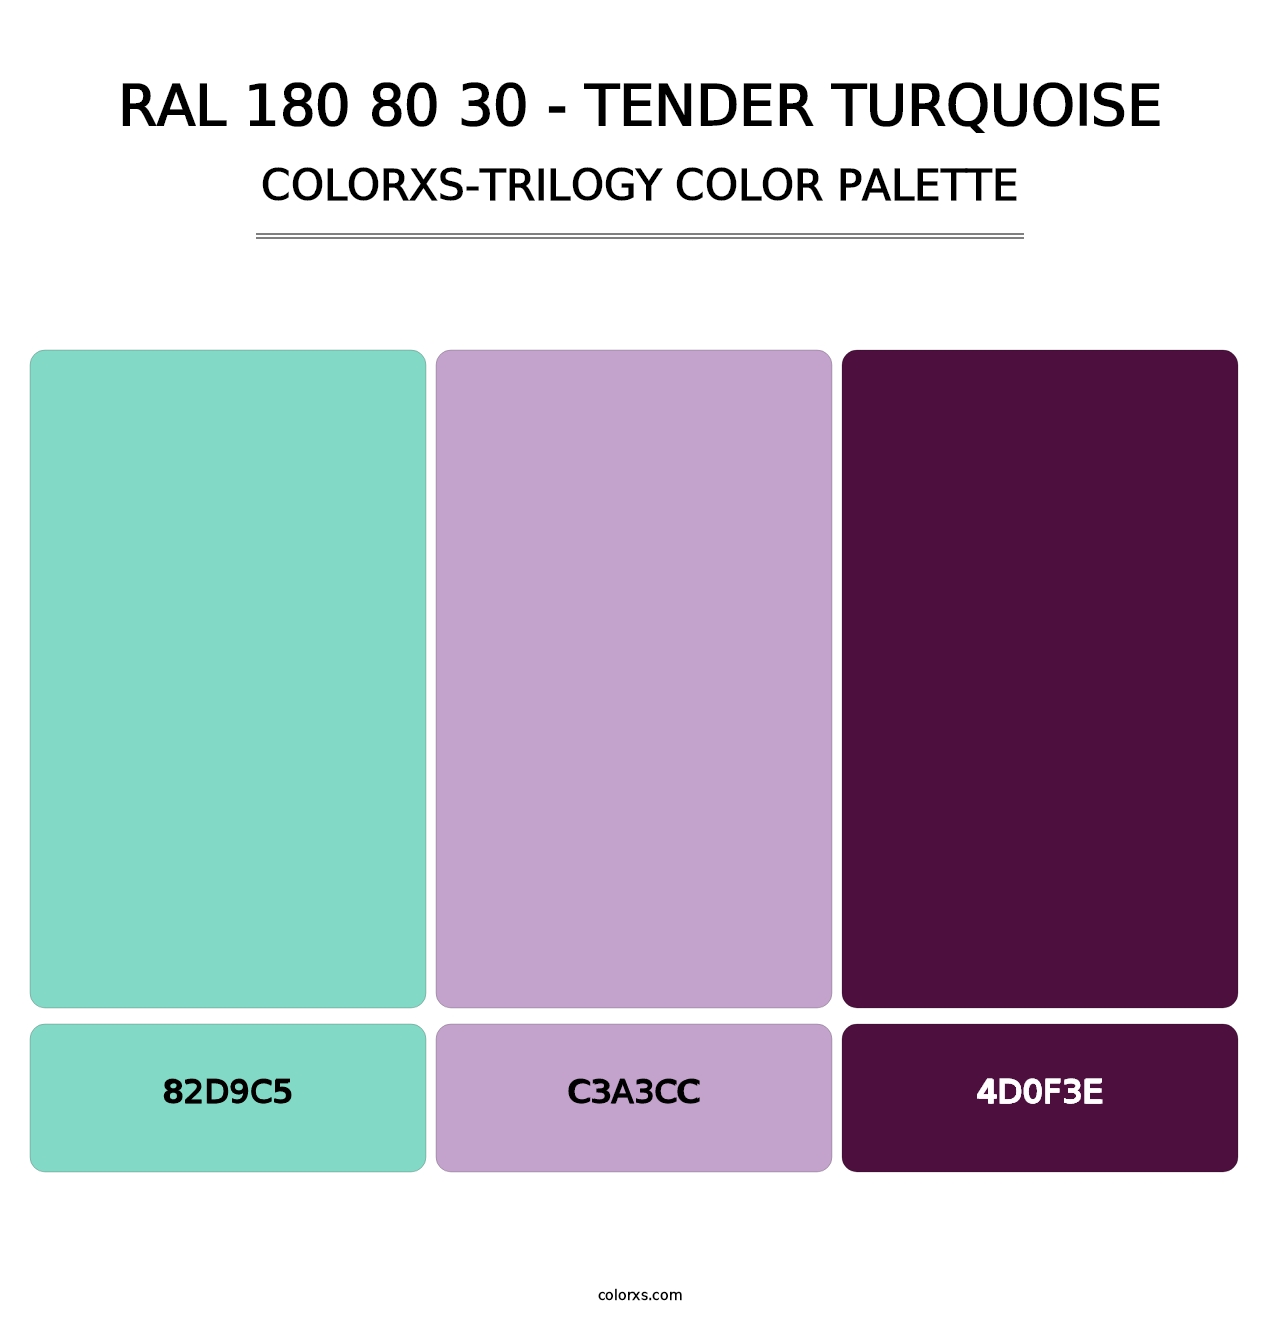 RAL 180 80 30 - Tender Turquoise - Colorxs Trilogy Palette